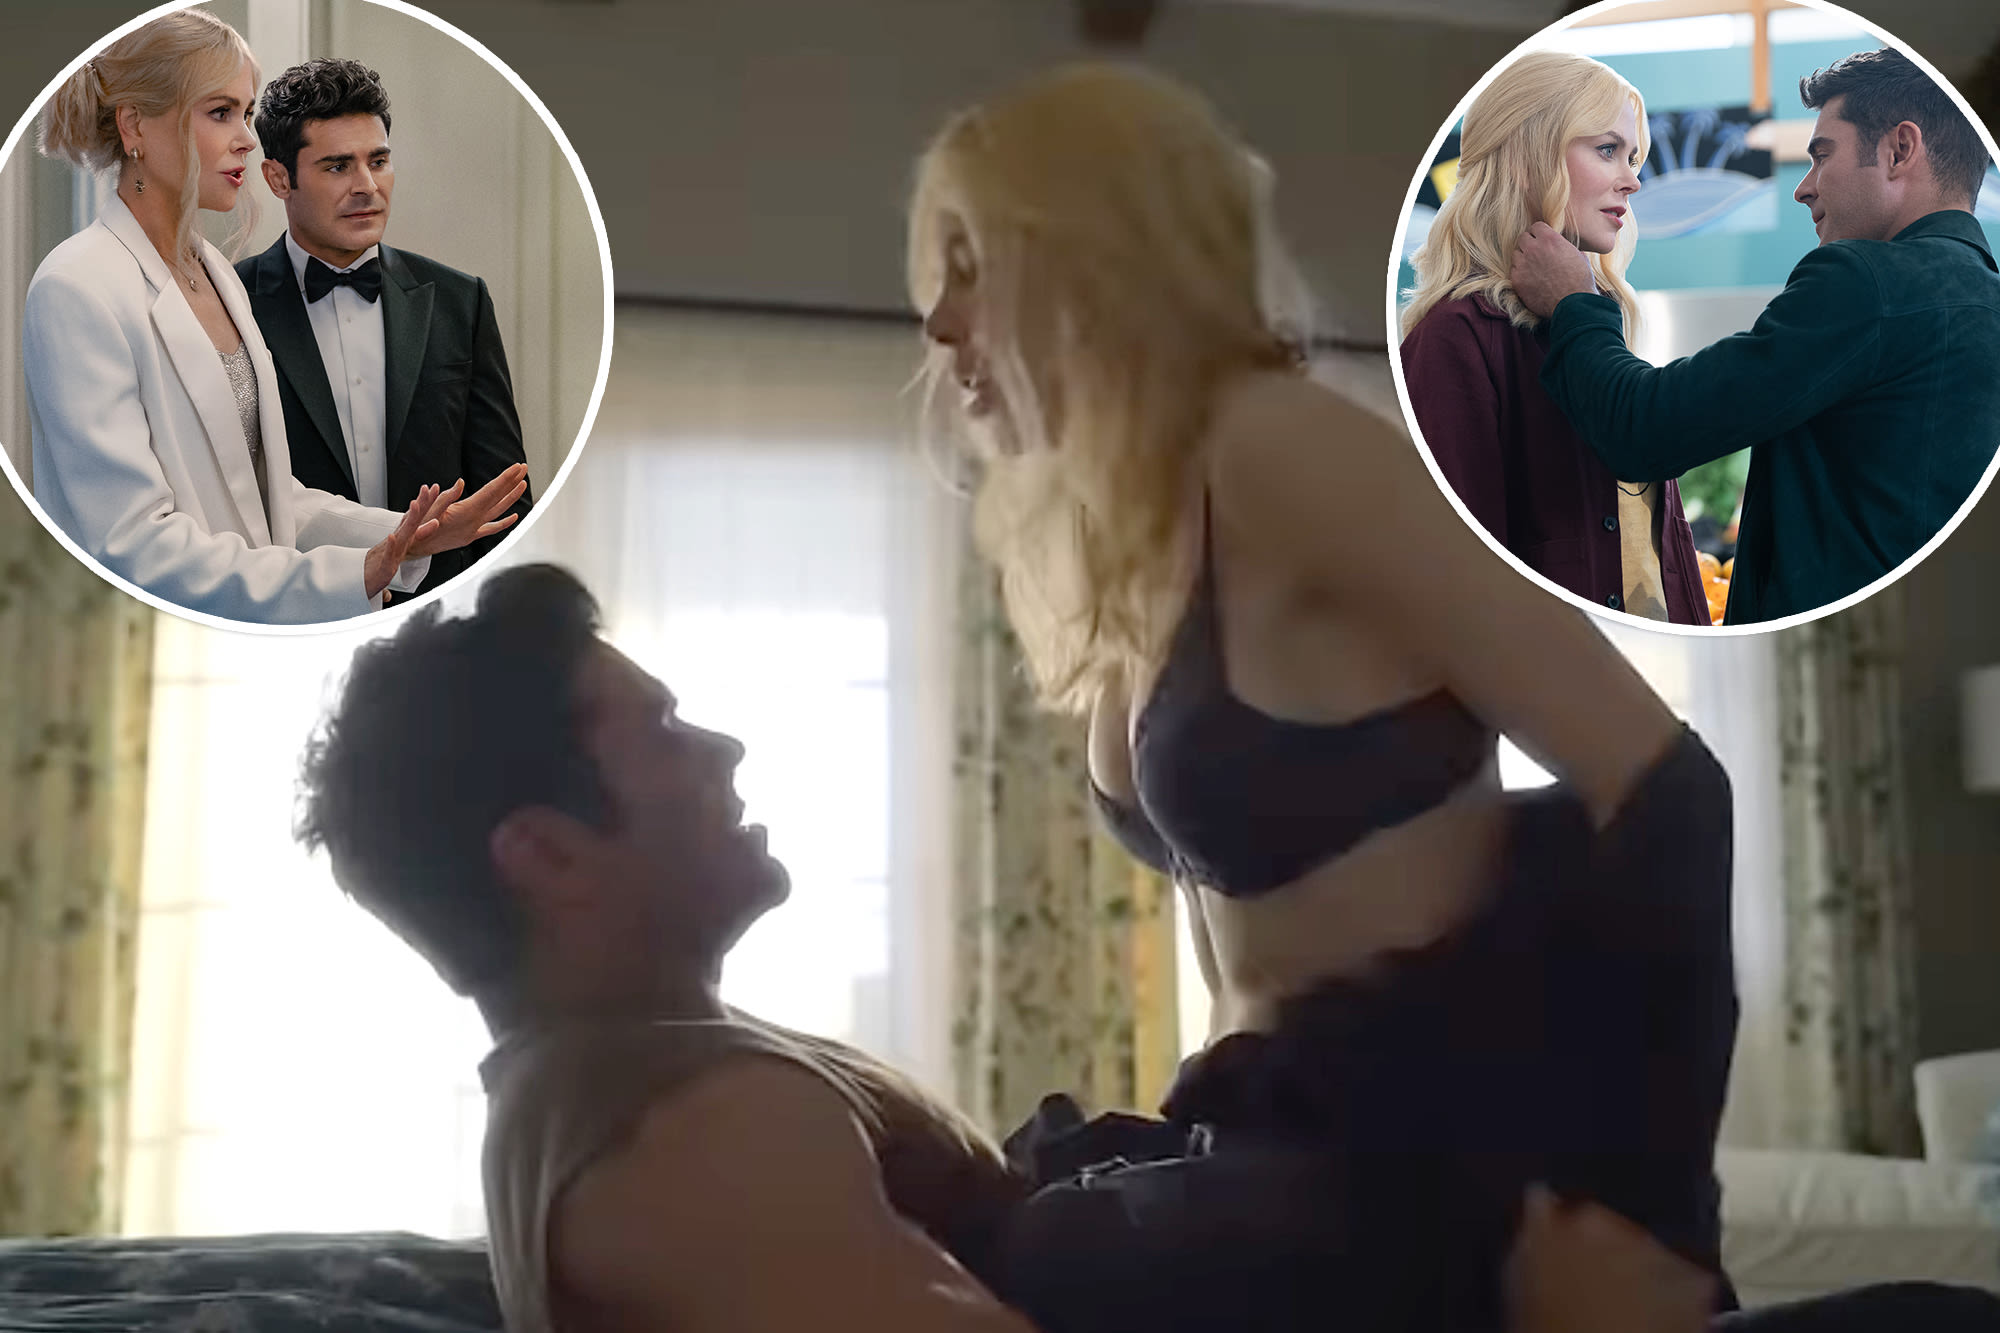 Nicole Kidman and Zac Efron strip down for hot sex scene in new ‘A Family Affair’ trailer